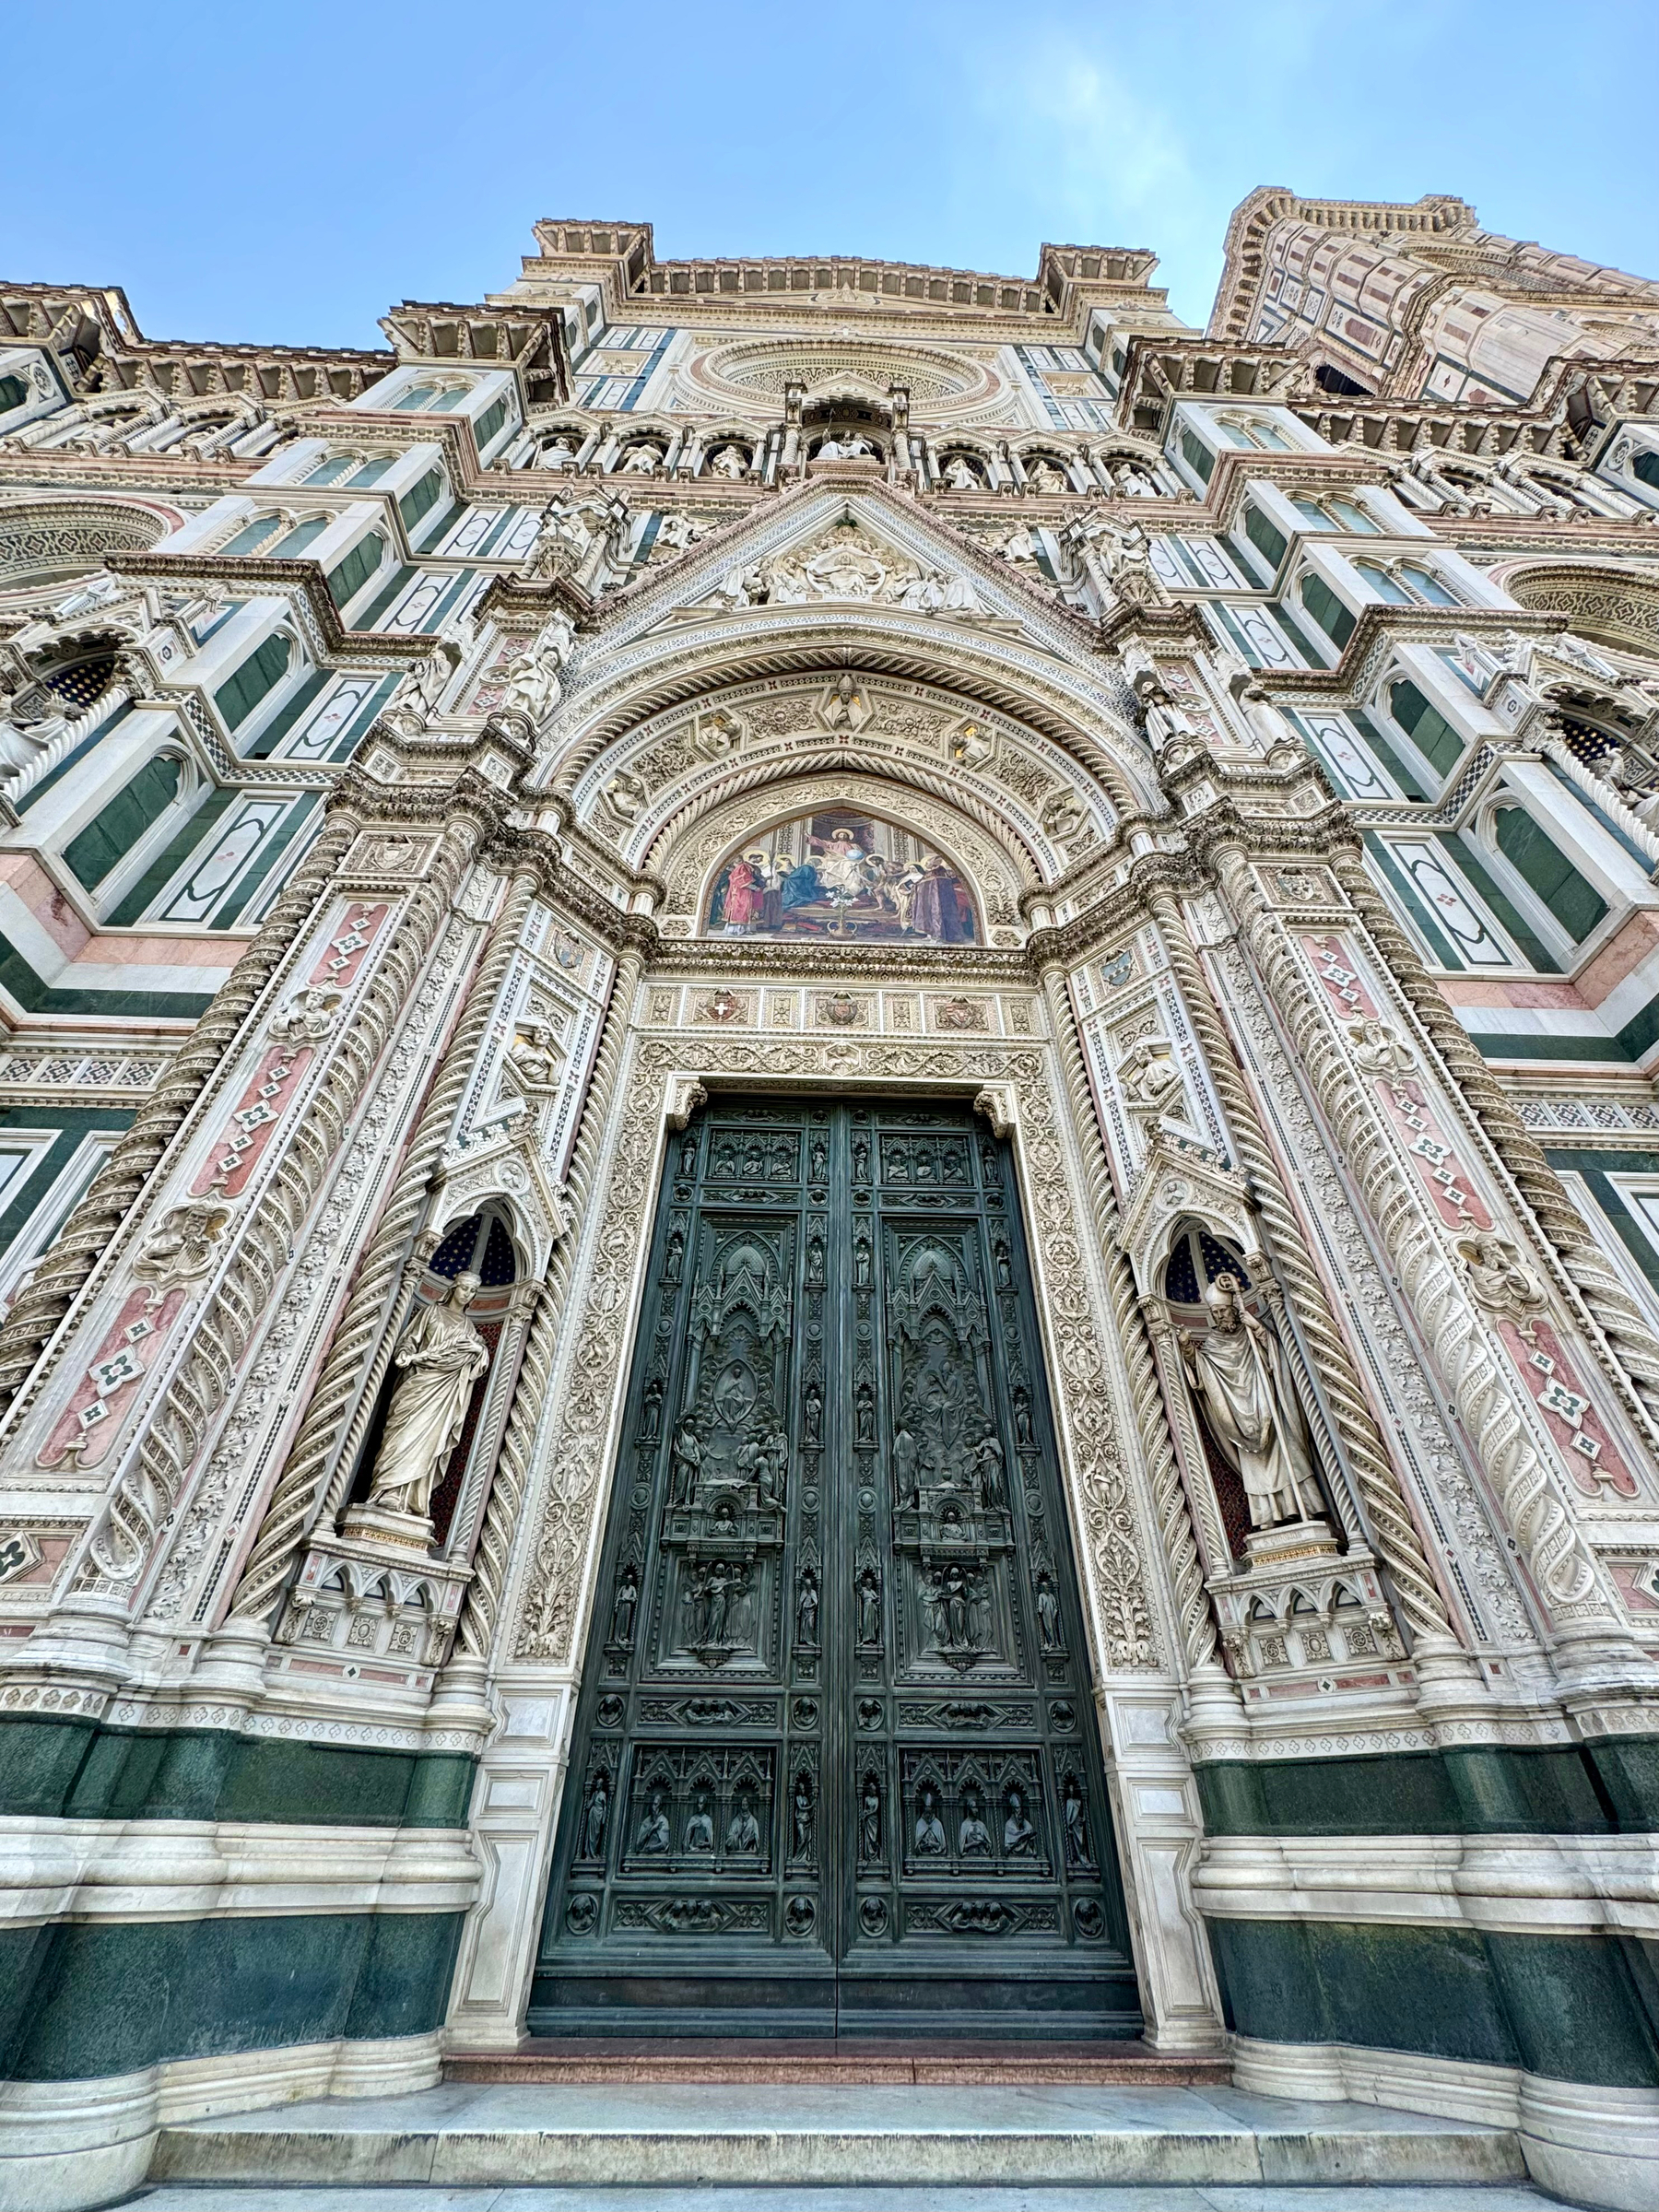 This image shows the intricate and ornate facade of Florence Cathedral, also known as the Cathedral of Santa Maria del Fiore, in Florence, Italy. The focus is on the central main doors, which are richly decorated with religious carvings and sculptures. 